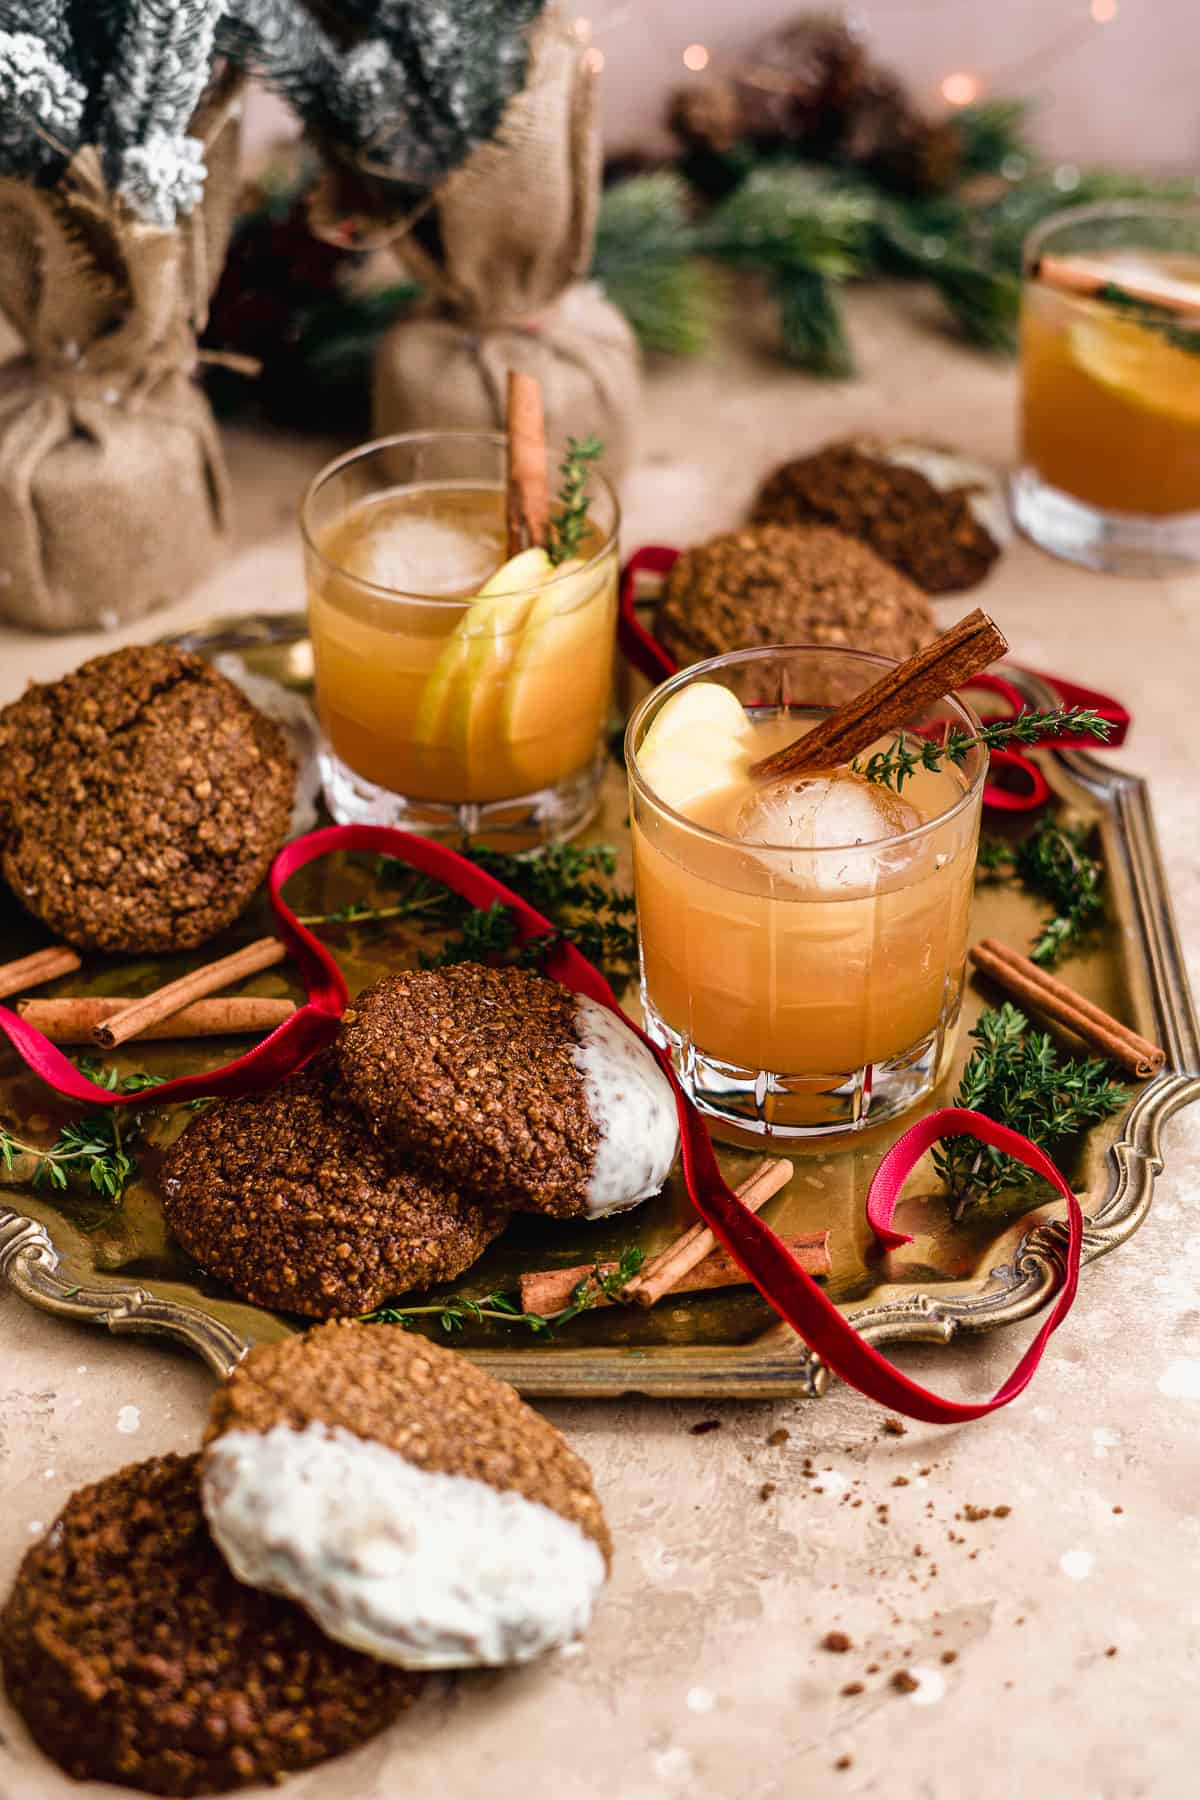 Two Smoked Cinnamon Apple Cider Bourbon Smash Cocktails in cut crystal glasses on a gold tray with cinnamon stick garnish and assorted cookies to enjoy while sipping!  